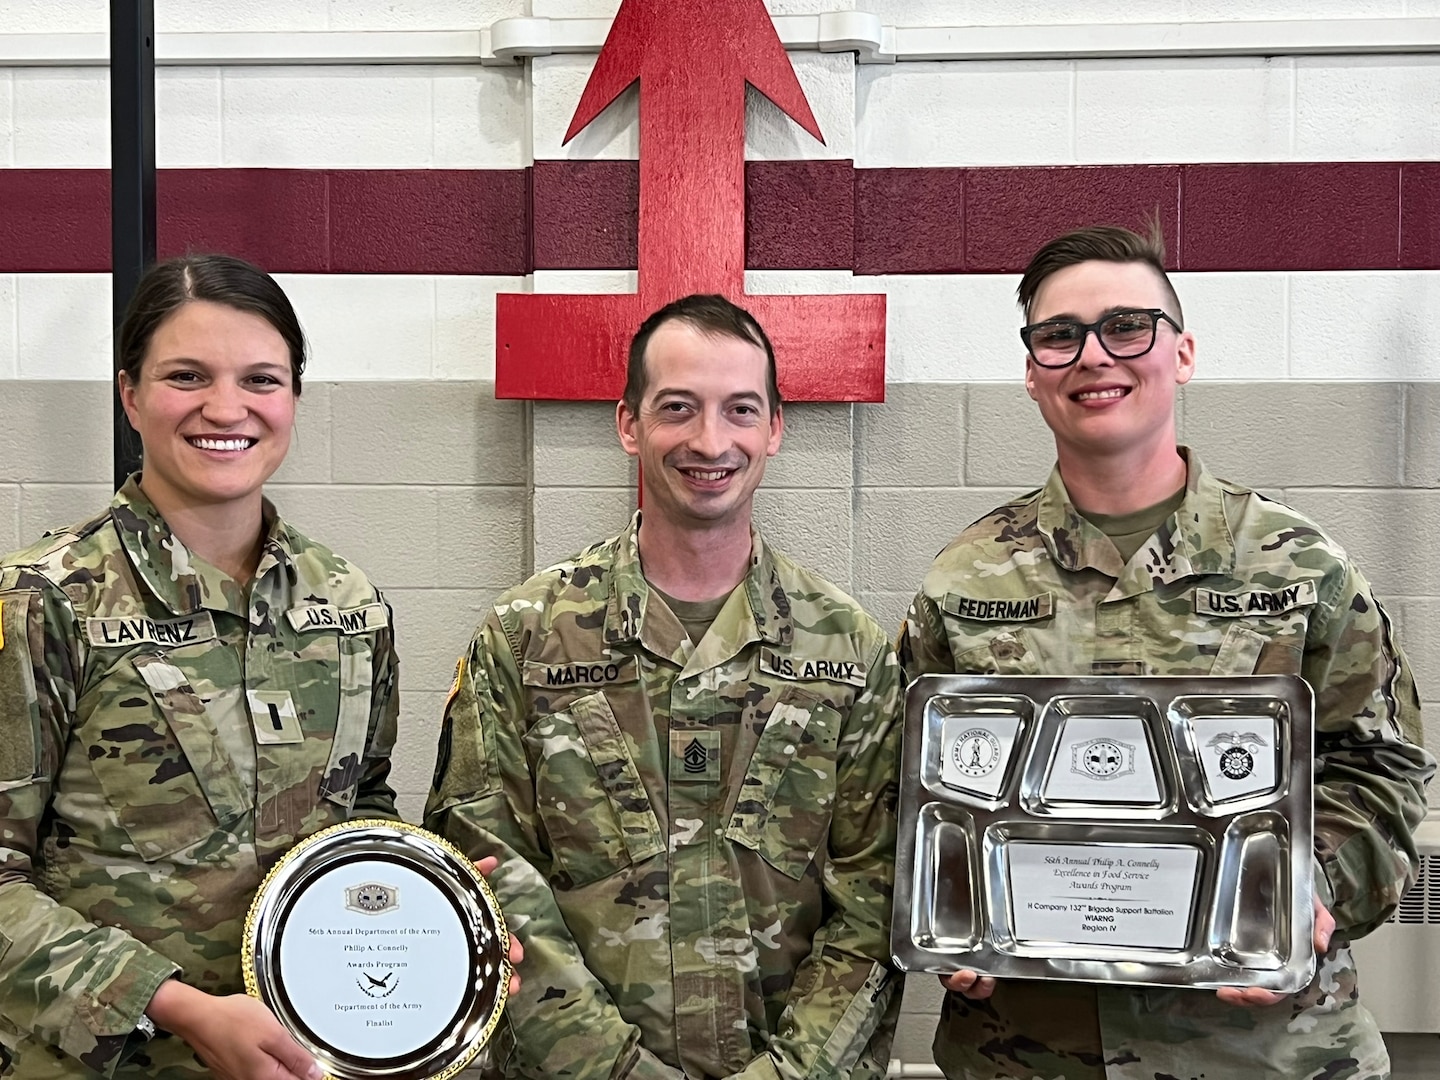 Hotel Company leadership, 1st Lt. Danielle Lavrenz (left), 1st Sgt. Roger Marco (center), and Sgt. 1st Class Dawn Federman (right), stand together for a group photo with memorabilia following their unit’s participation in the 56th Philip A. Connelly culinary competition at their Eau Claire armory on March 17, 2024. This Wisconsin Army National Guard unit was just one of four units that made it to the final level of the competition for fiscal year 24. (U.S. National Guard photo by Sgt. Nina Kowalkowski)